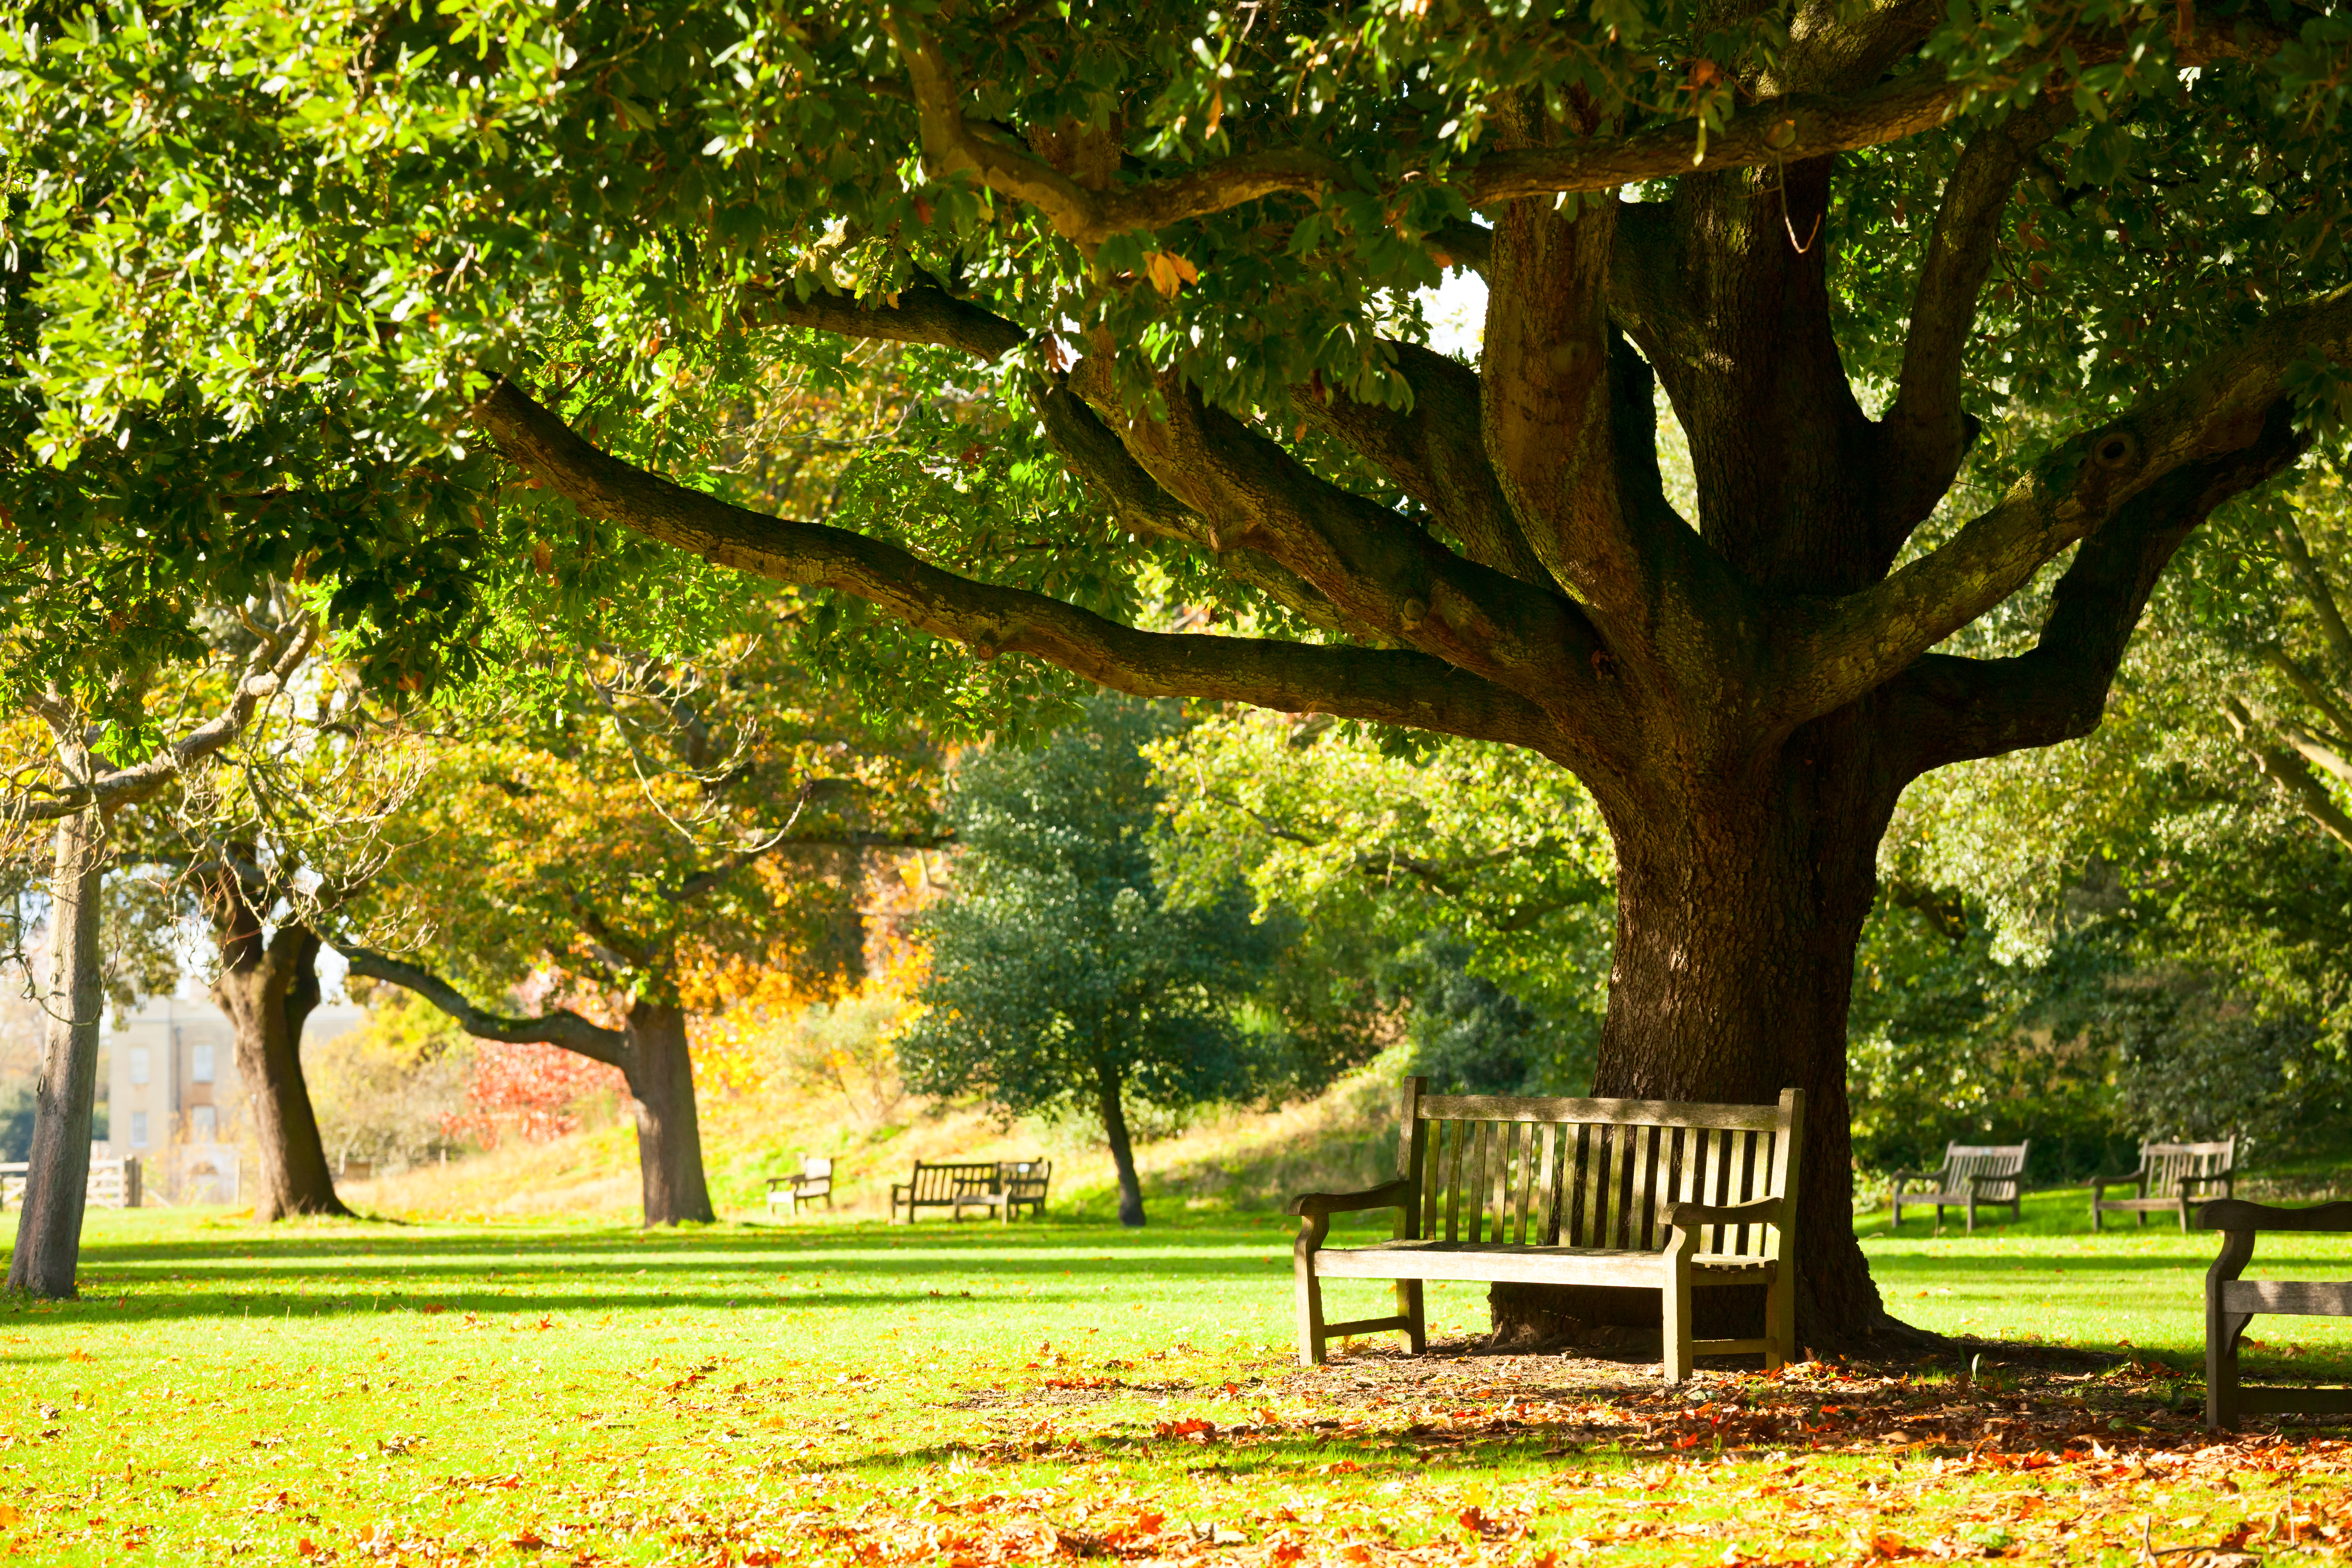 A bench under a tree in a park.